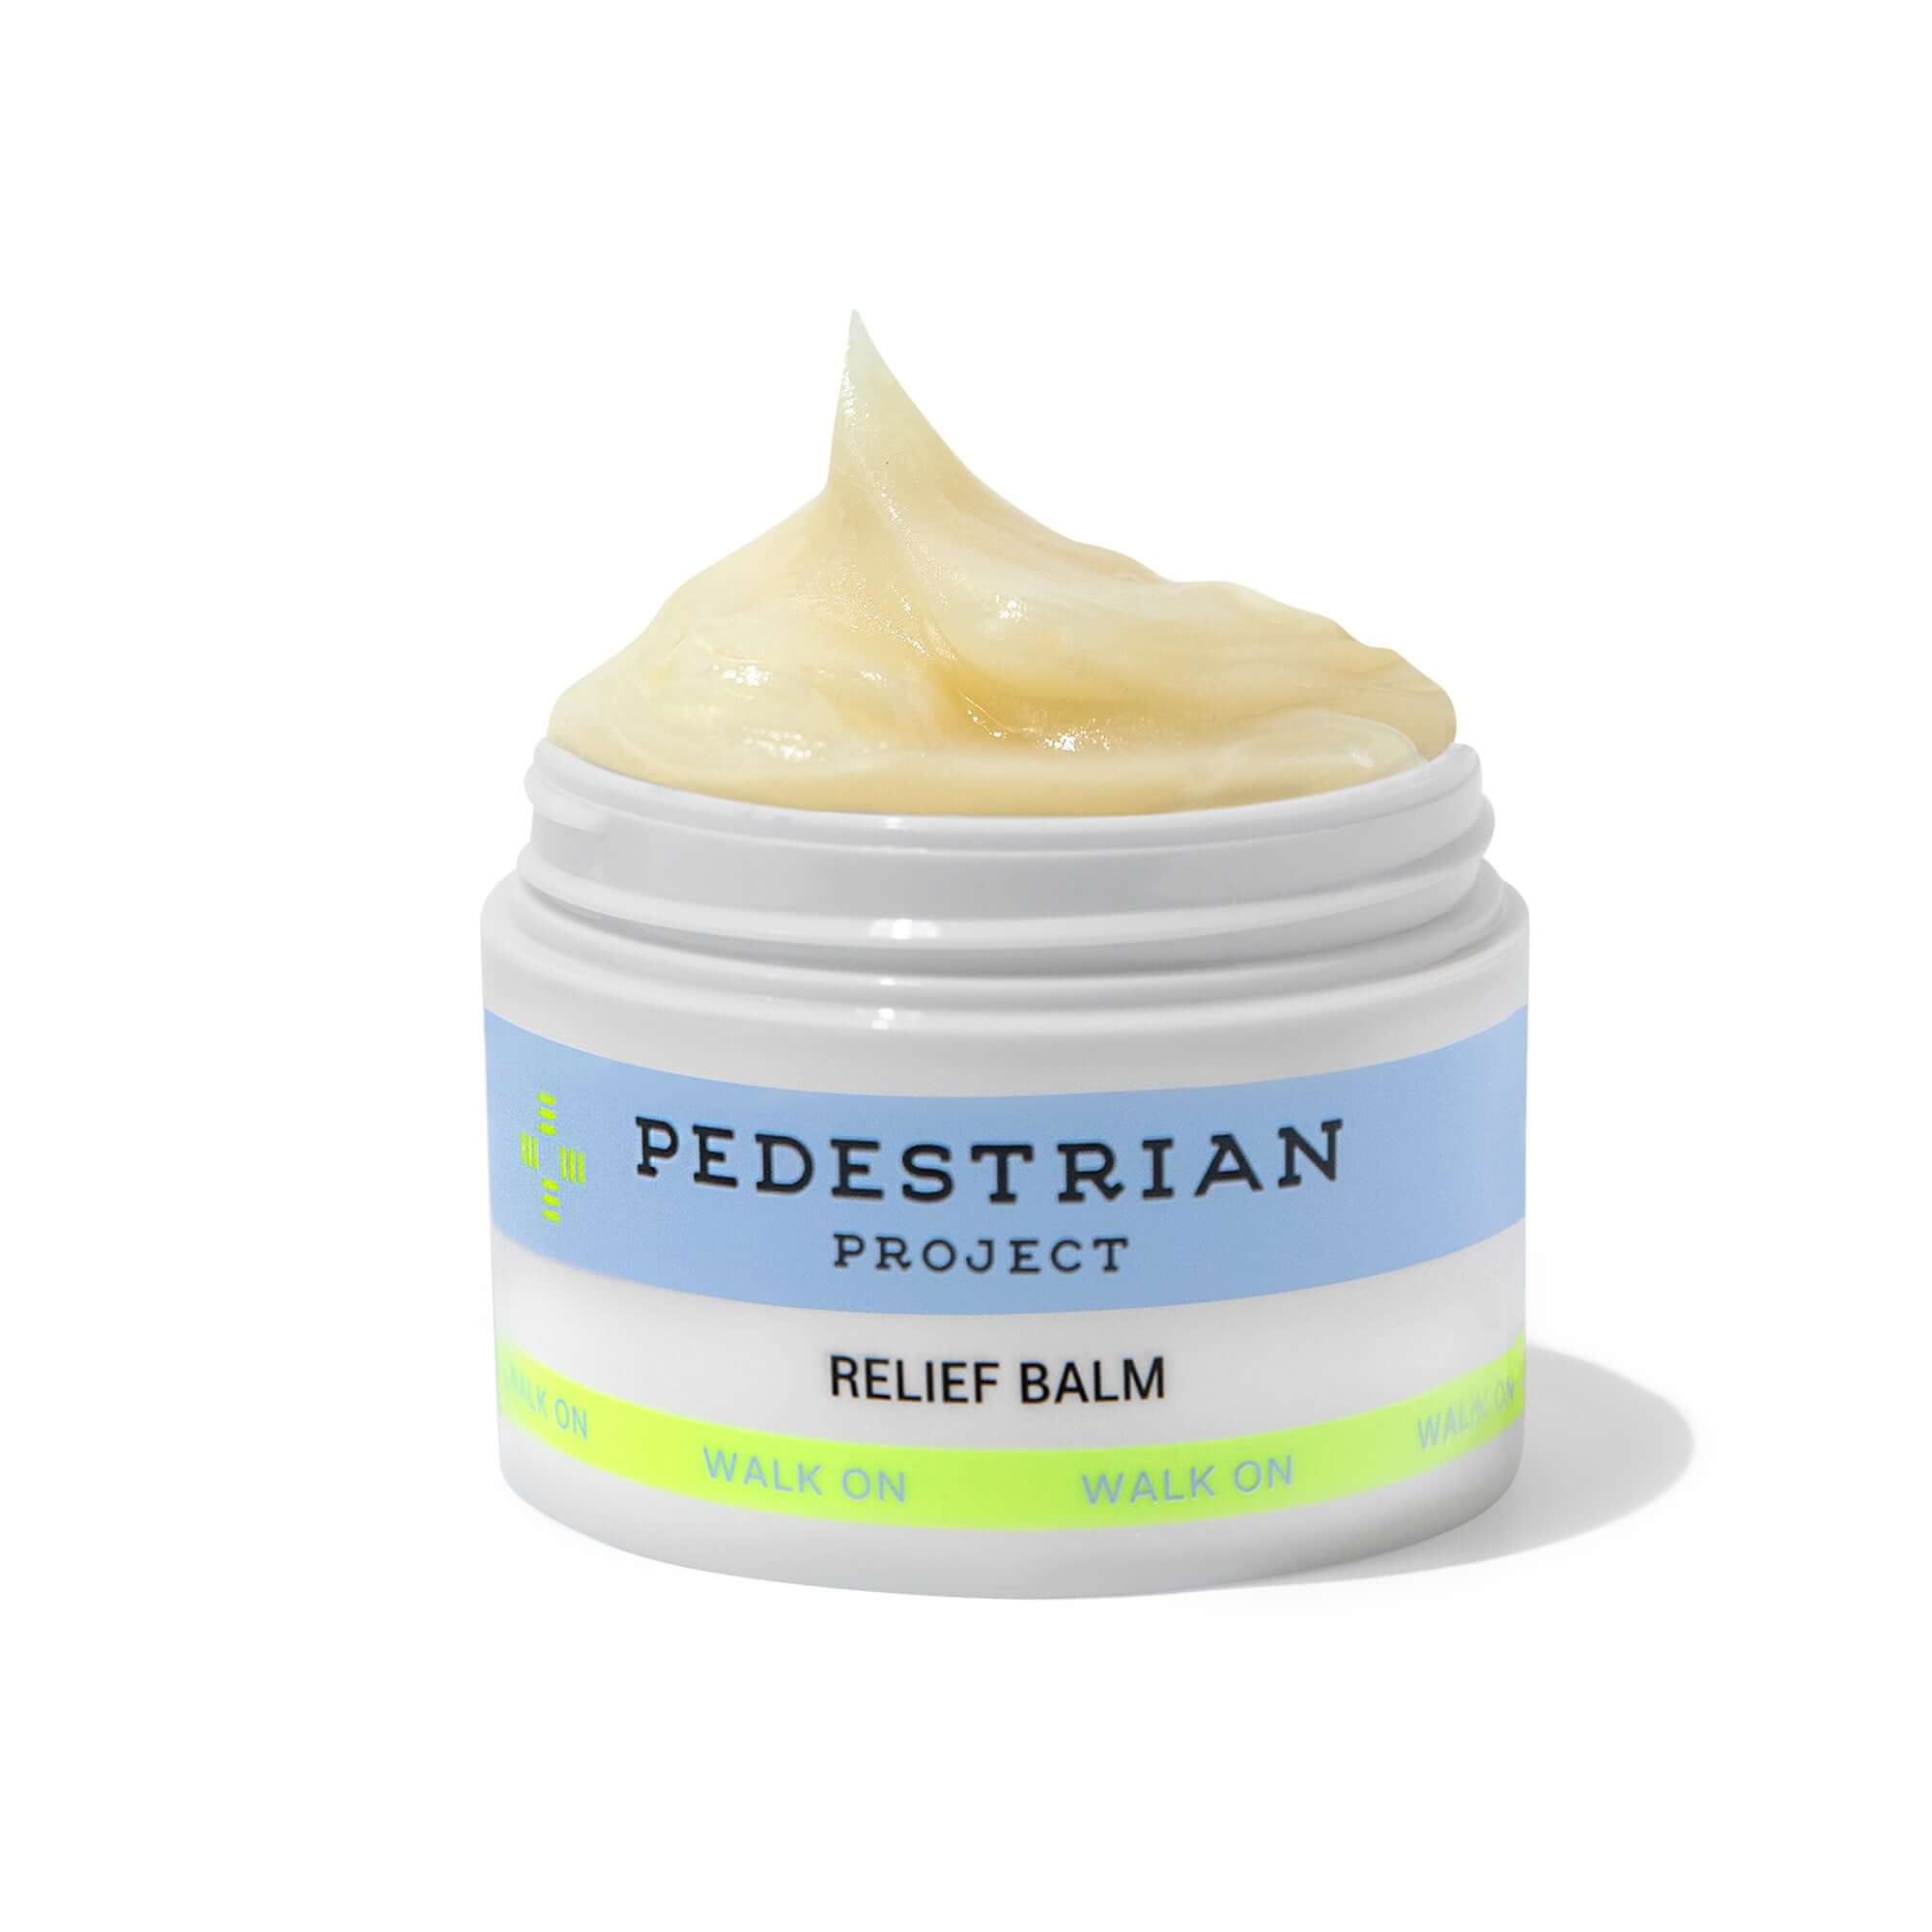 Product swirled in CBD Relief Balm jar with top of jar removed